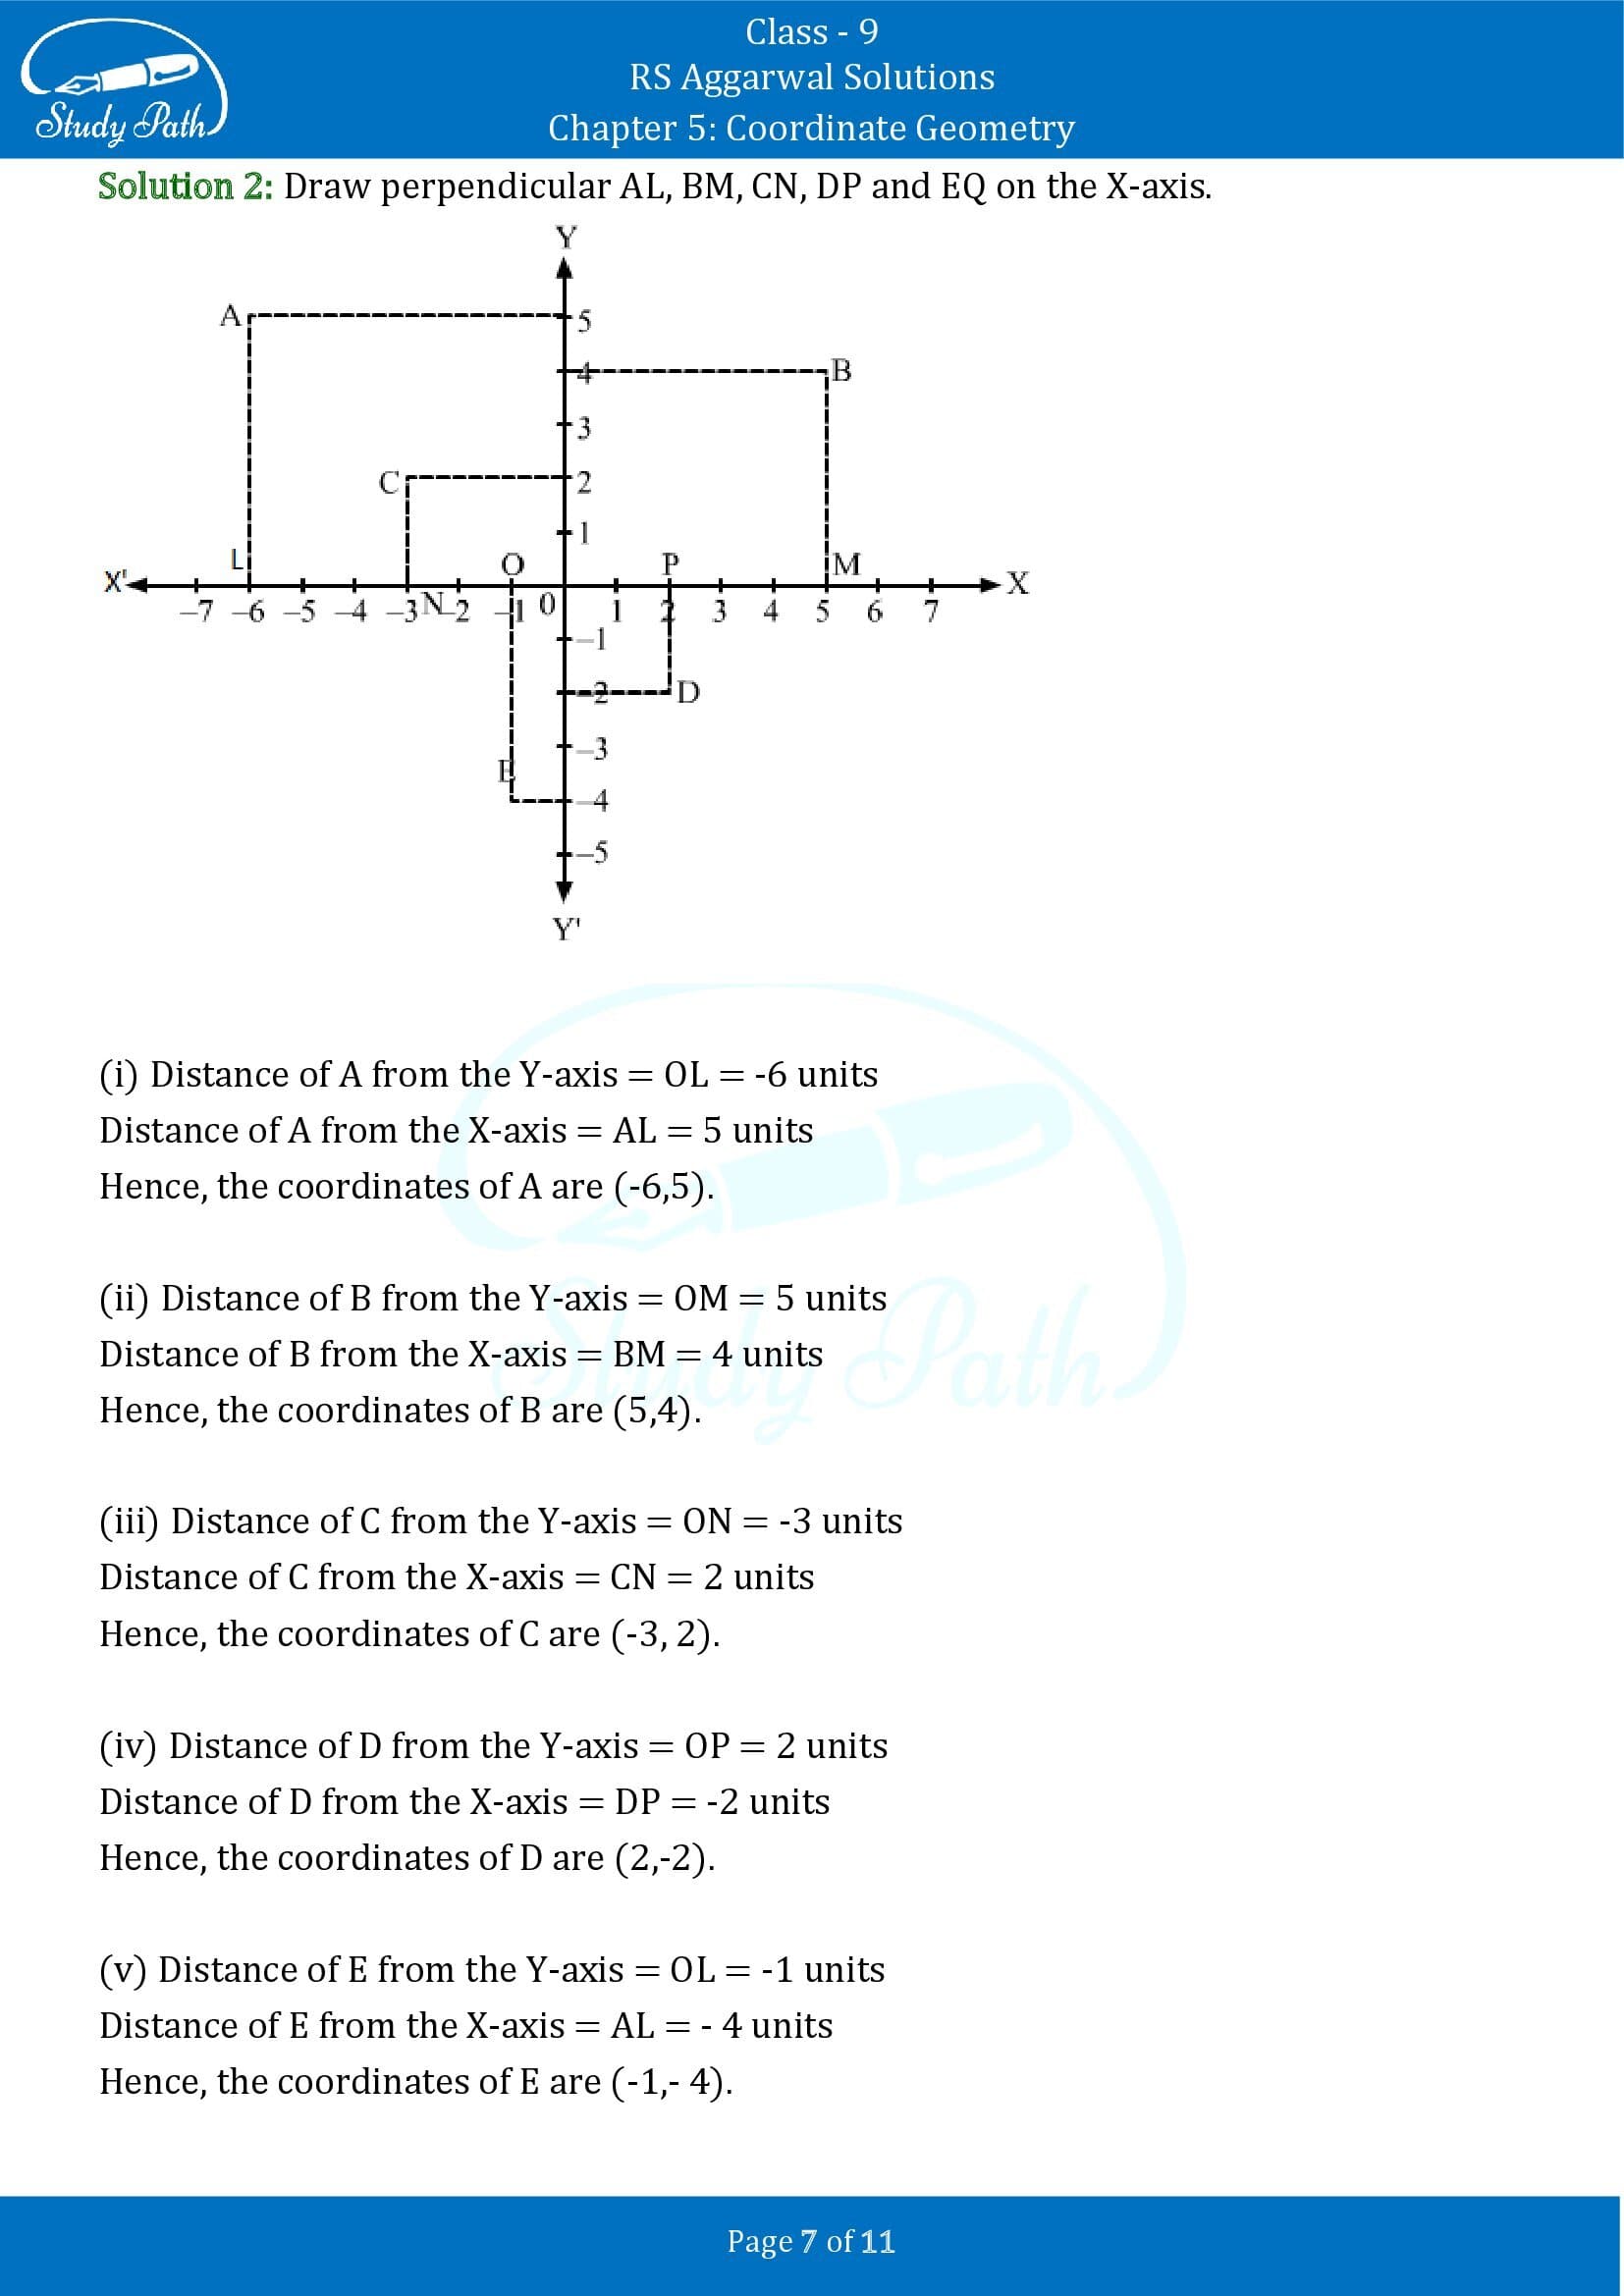 RS Aggarwal Solutions Class 9 Chapter 5 Coordinate Geometry Exercise 5 00007